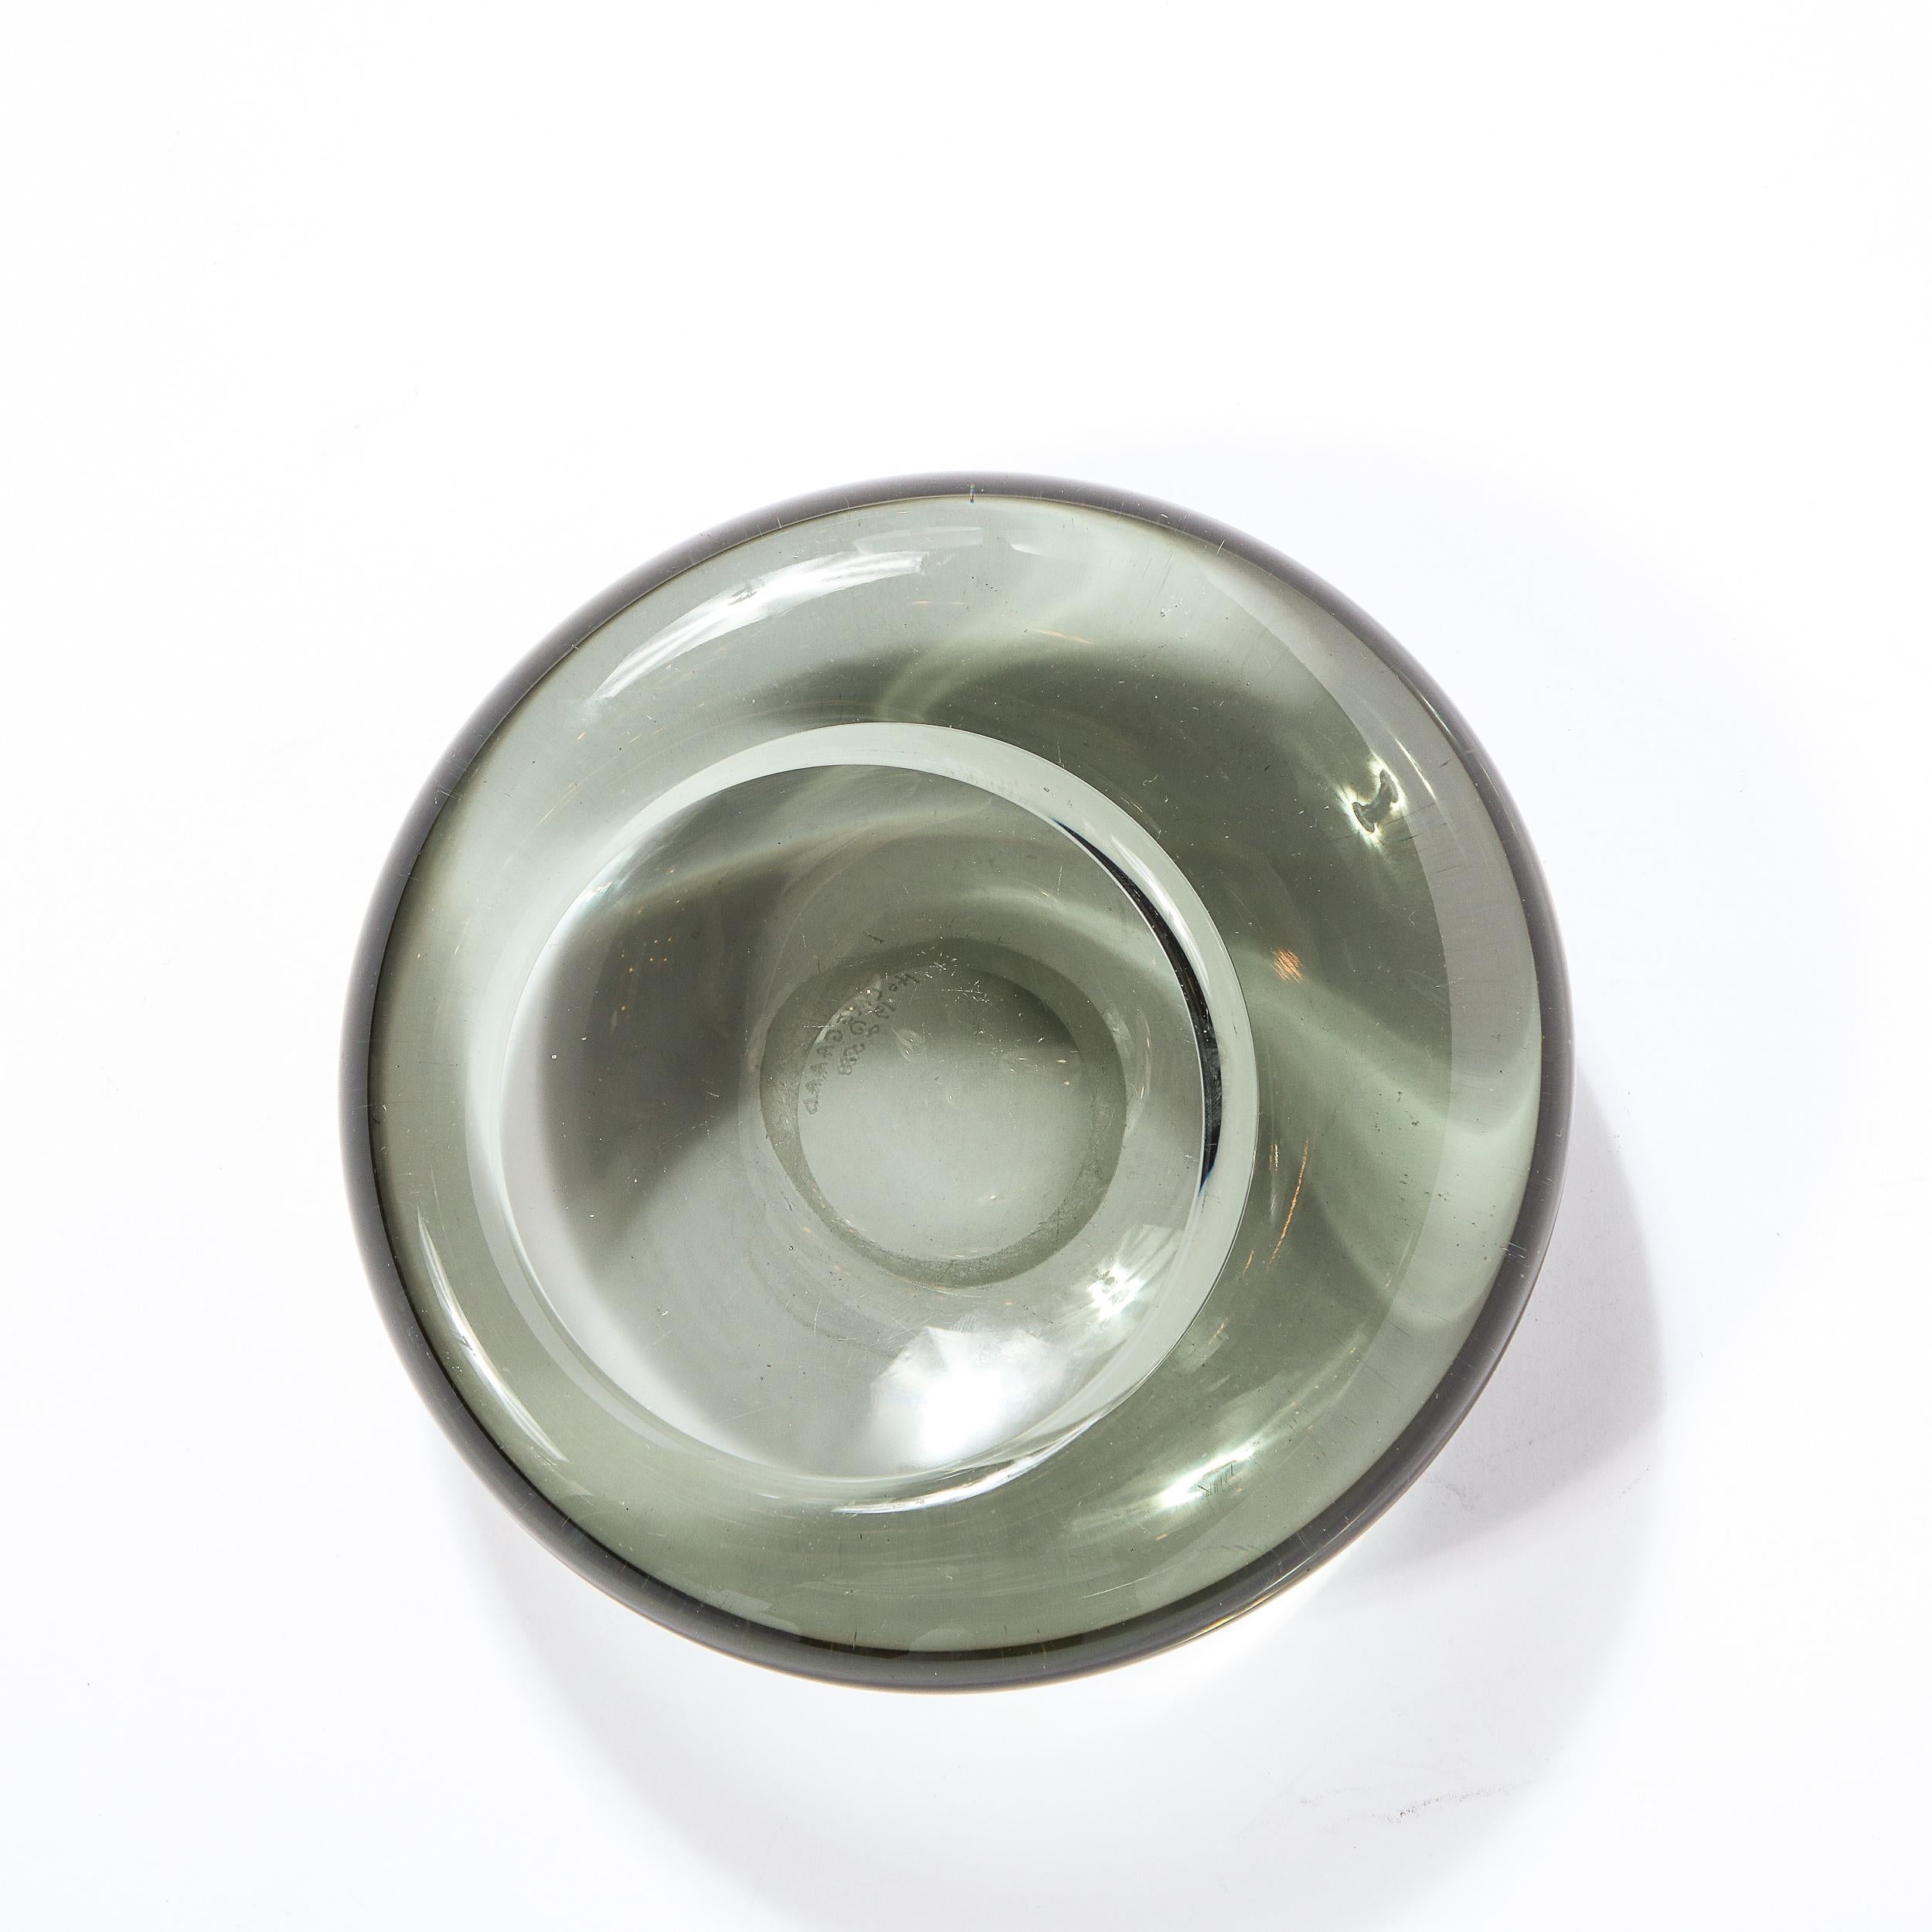 This stunning Mid-Century Modern smoked glass dish was realized by the celebrated atelier of Holmegaard in Sweden in 1958. It features a sculptural circular body with slightly off set central depression- all in beautiful smoked translucent glass.